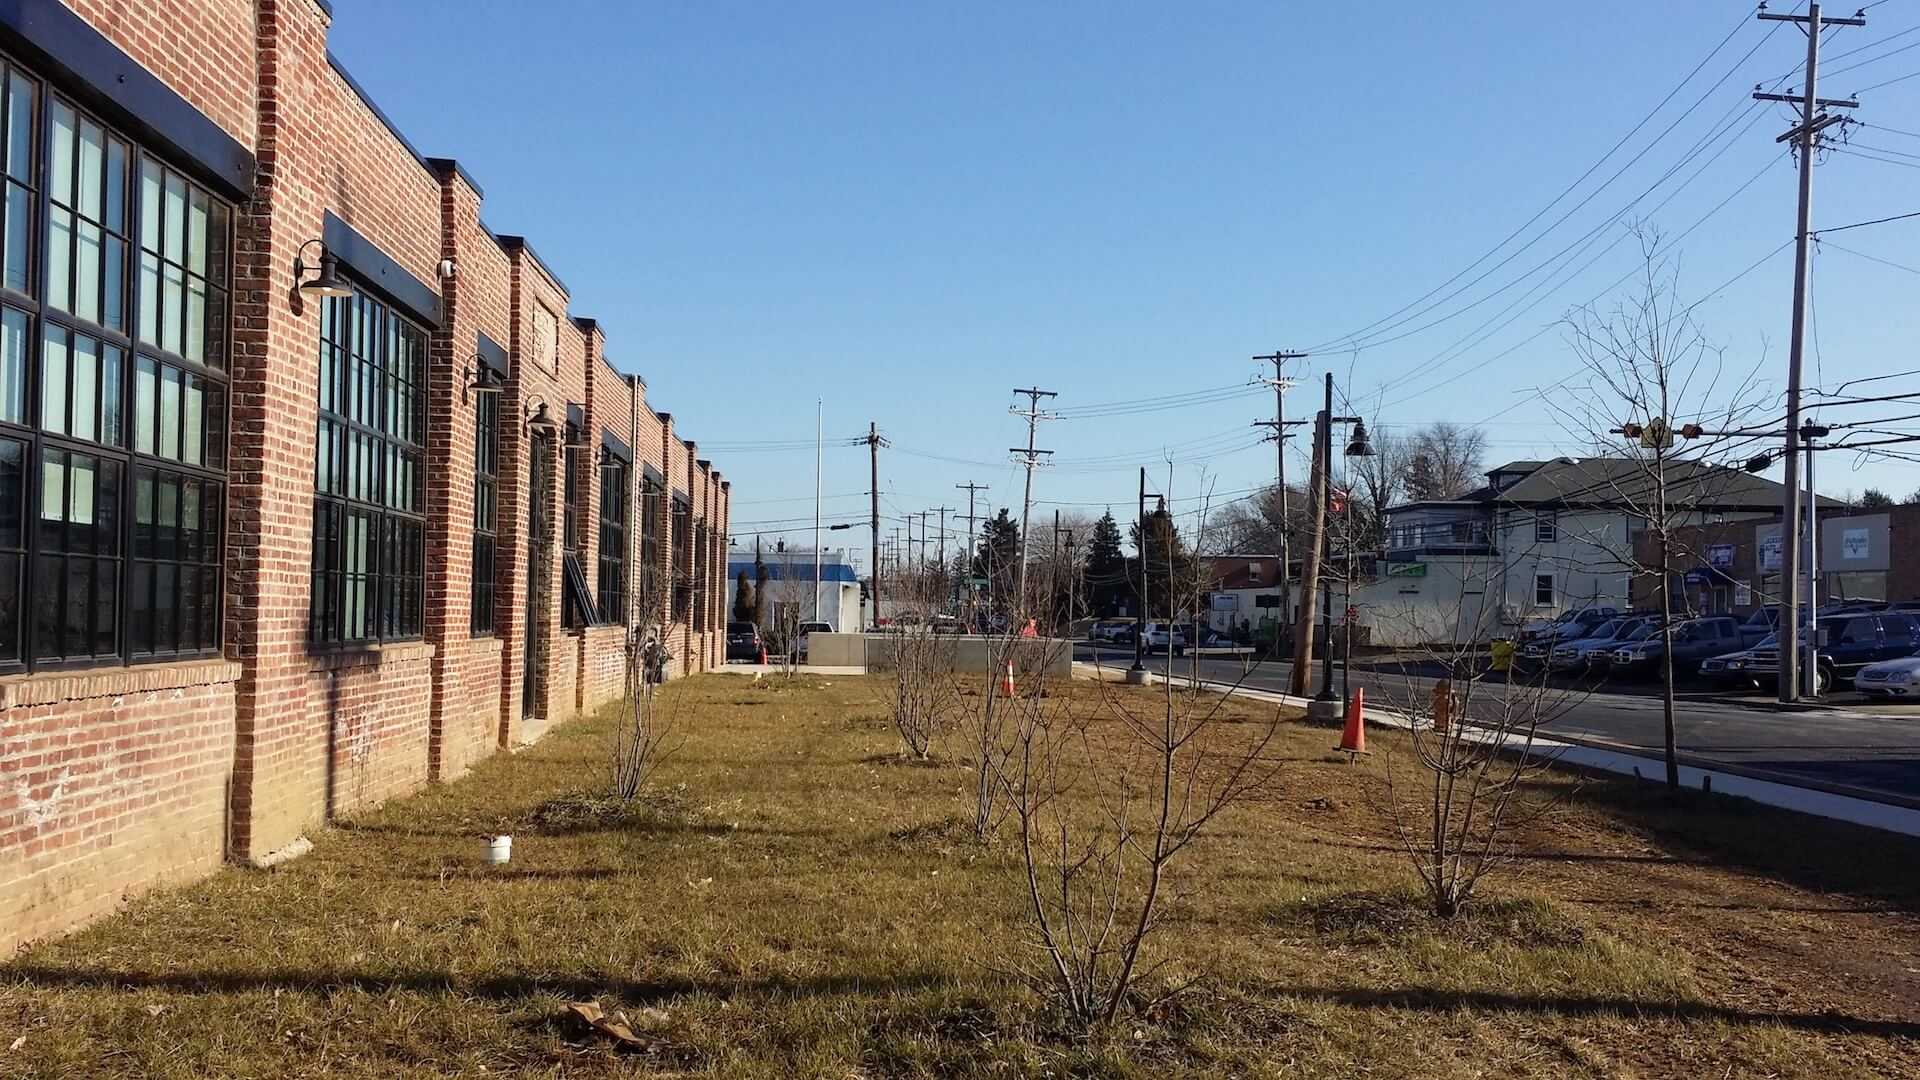 small thin trees beginning to grow in front of the brick building